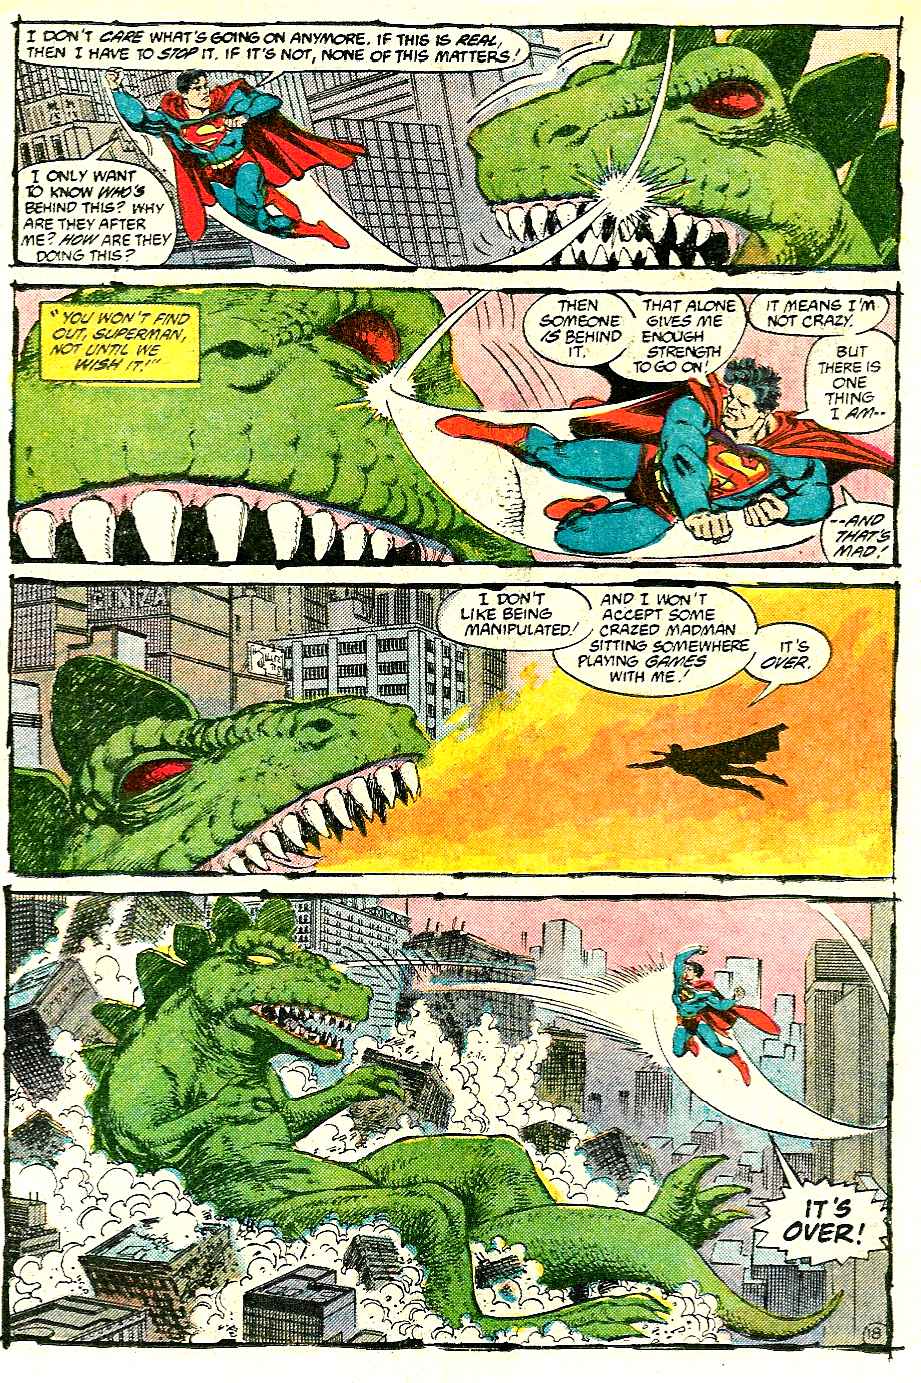 Adventures of Superman (1987) 427 Page 17